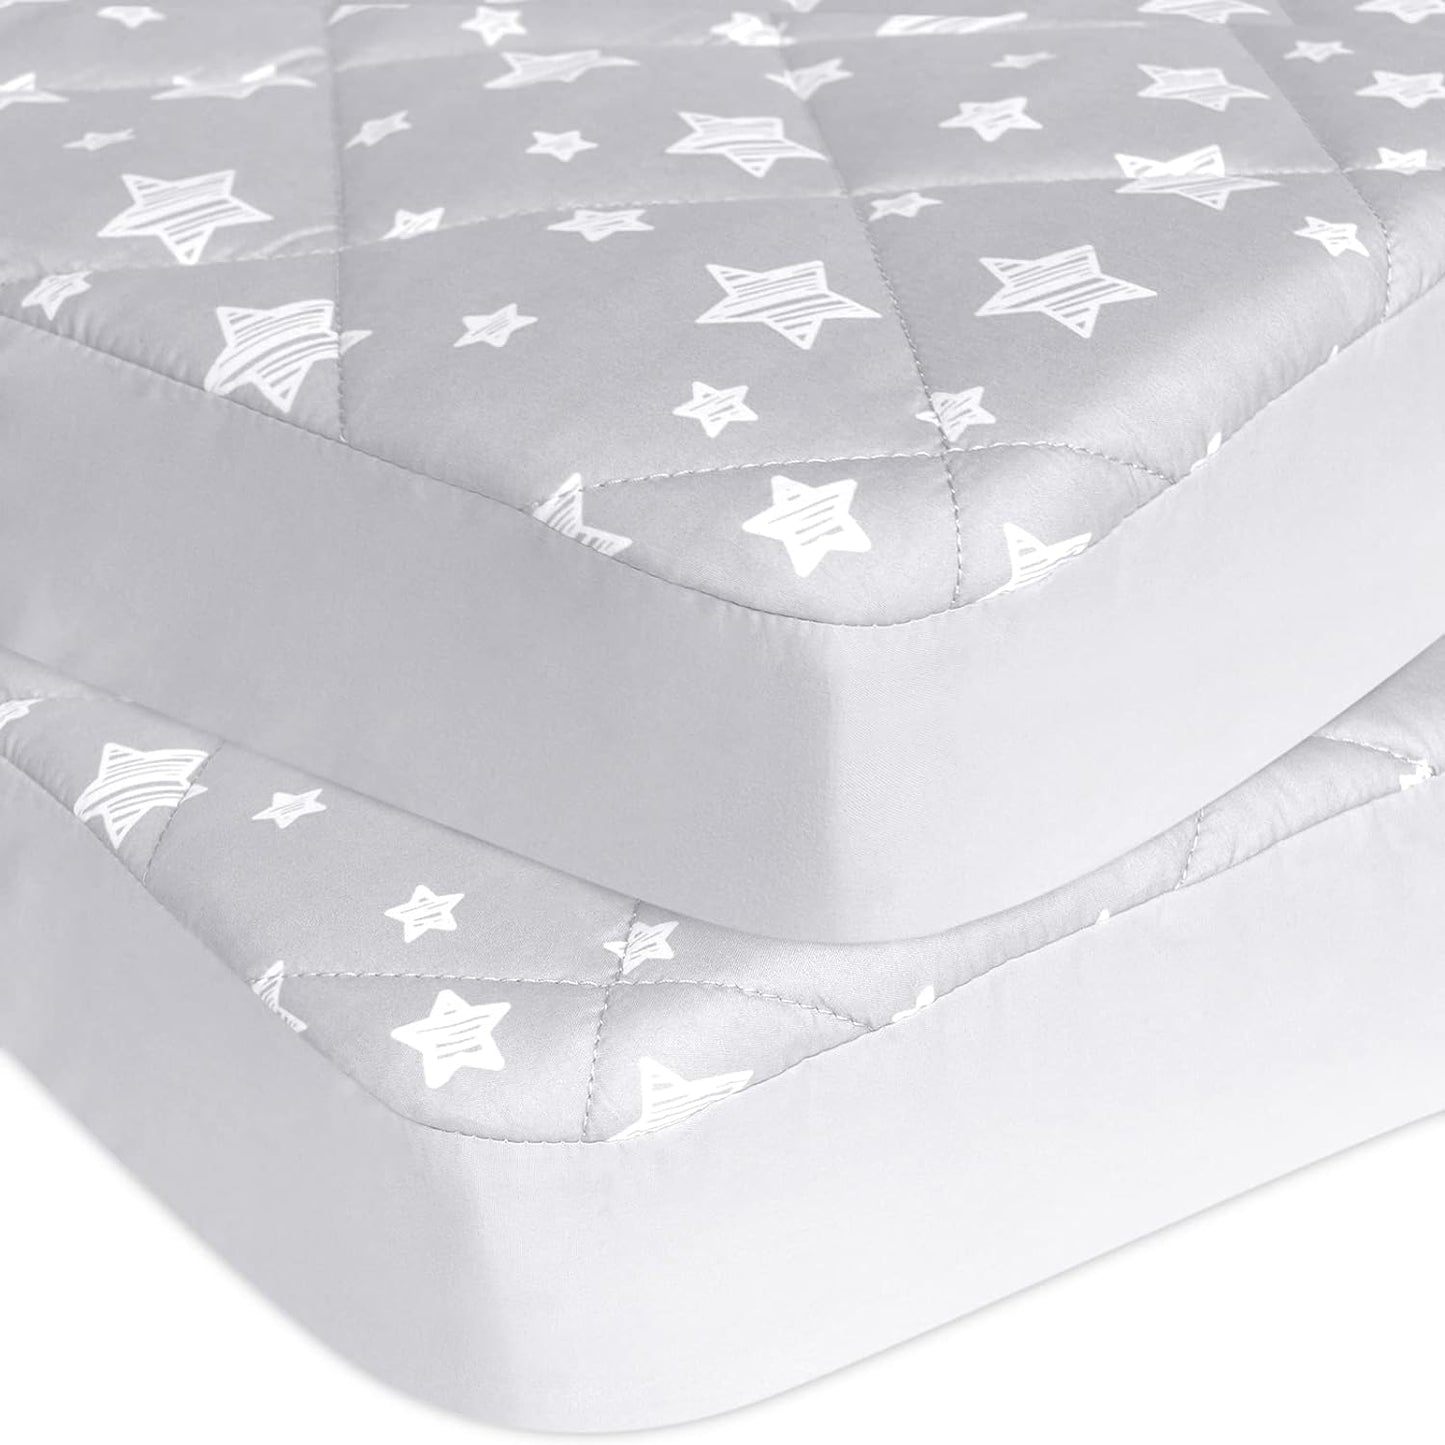 Pack n Play Sheet Quilted | Mini Crib Sheet - Pack and Play Mattress Pad Cover, Ultra-Soft Microfiber, Fits Graco Pack and Play, Grey Star